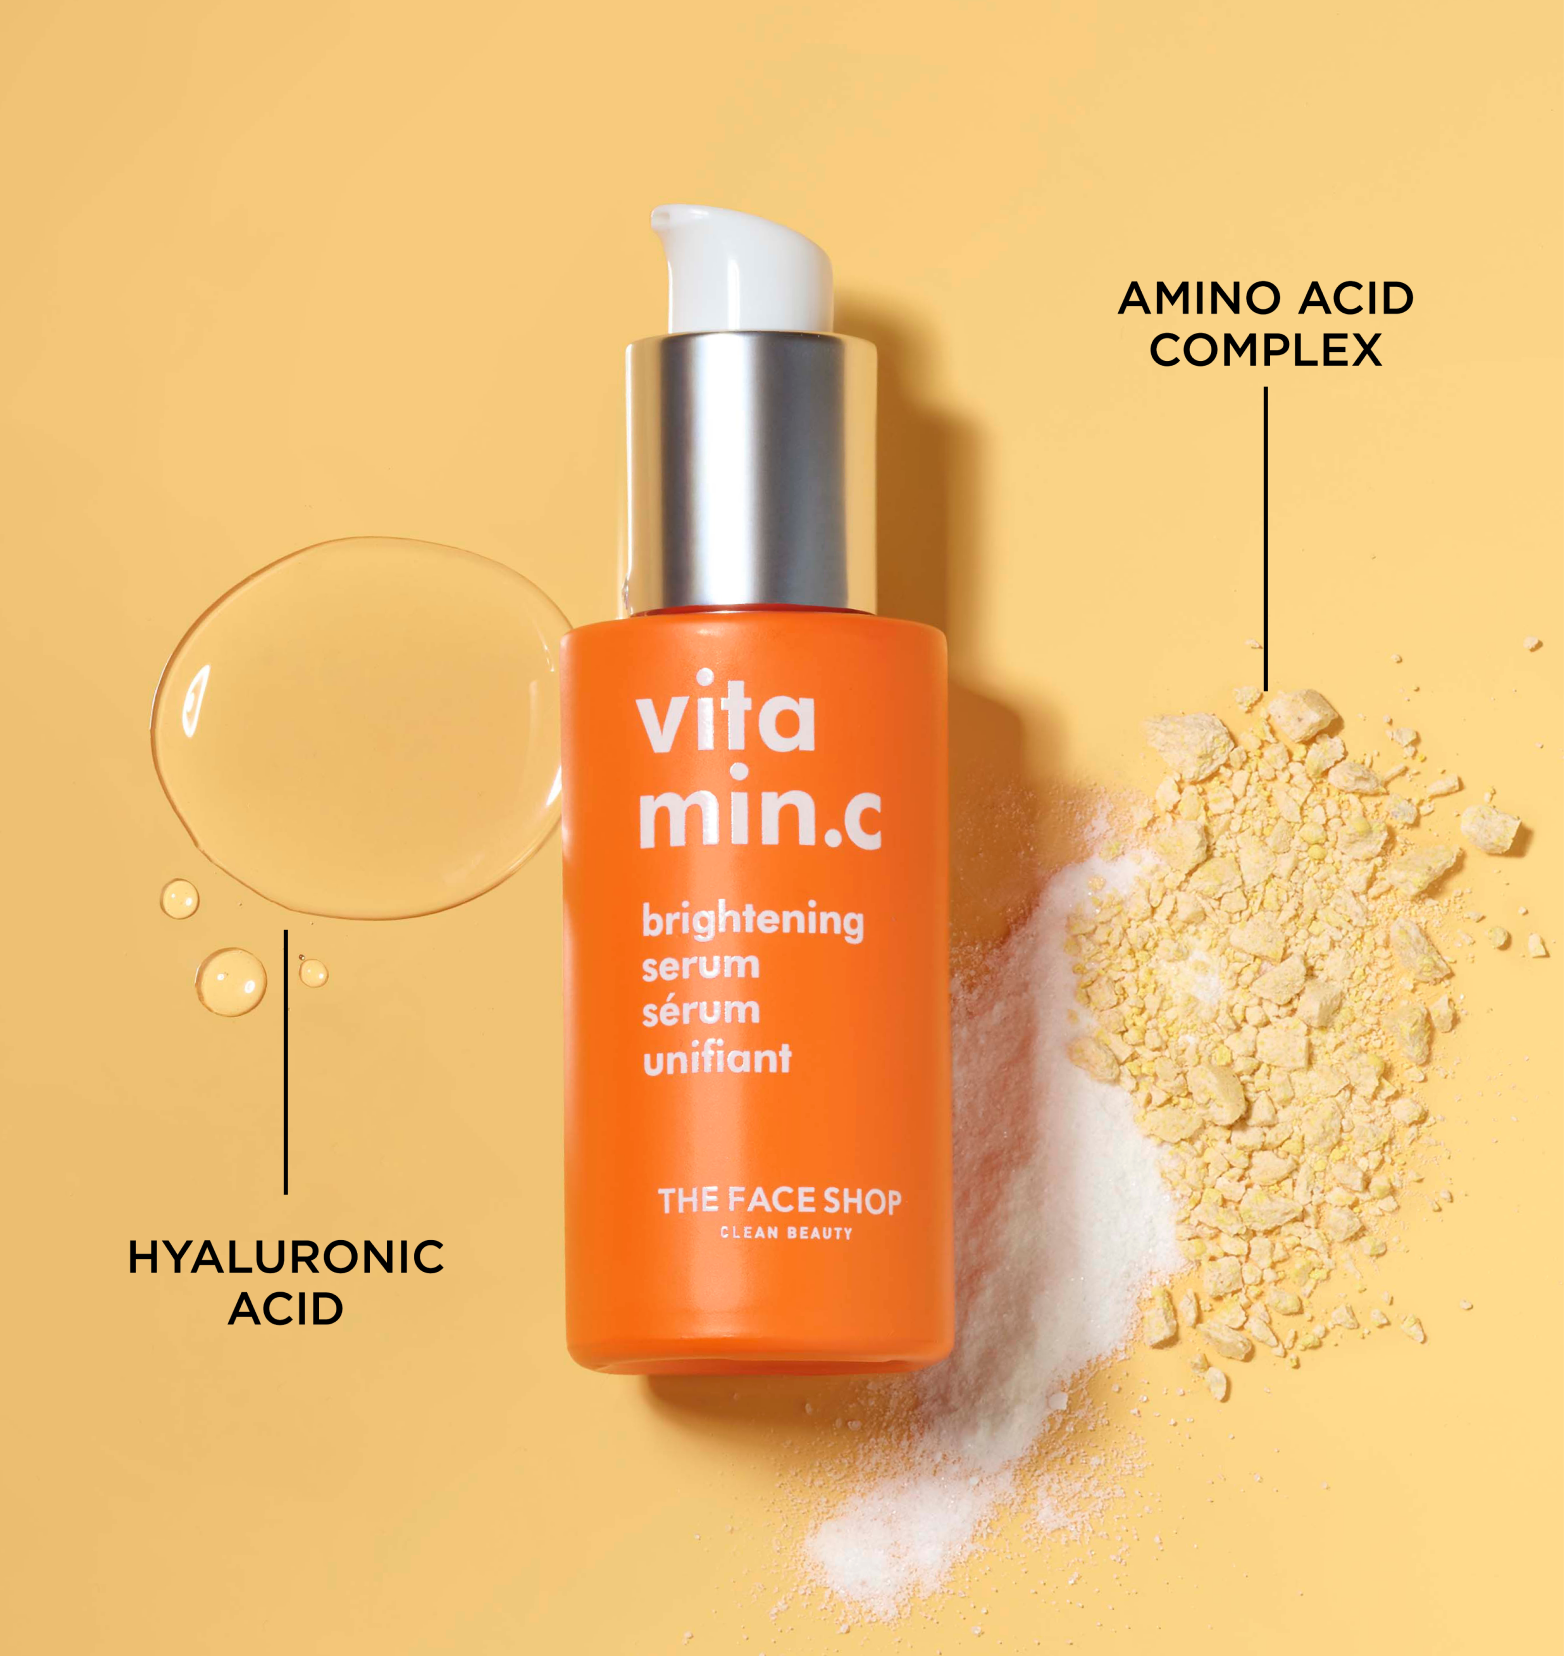 A small orange bottle of The Face Shop Vitamin C Skin Brightening Serum lying on a light orange surface with a drop of hyaluronic acid and a bit of amino aced complex powder